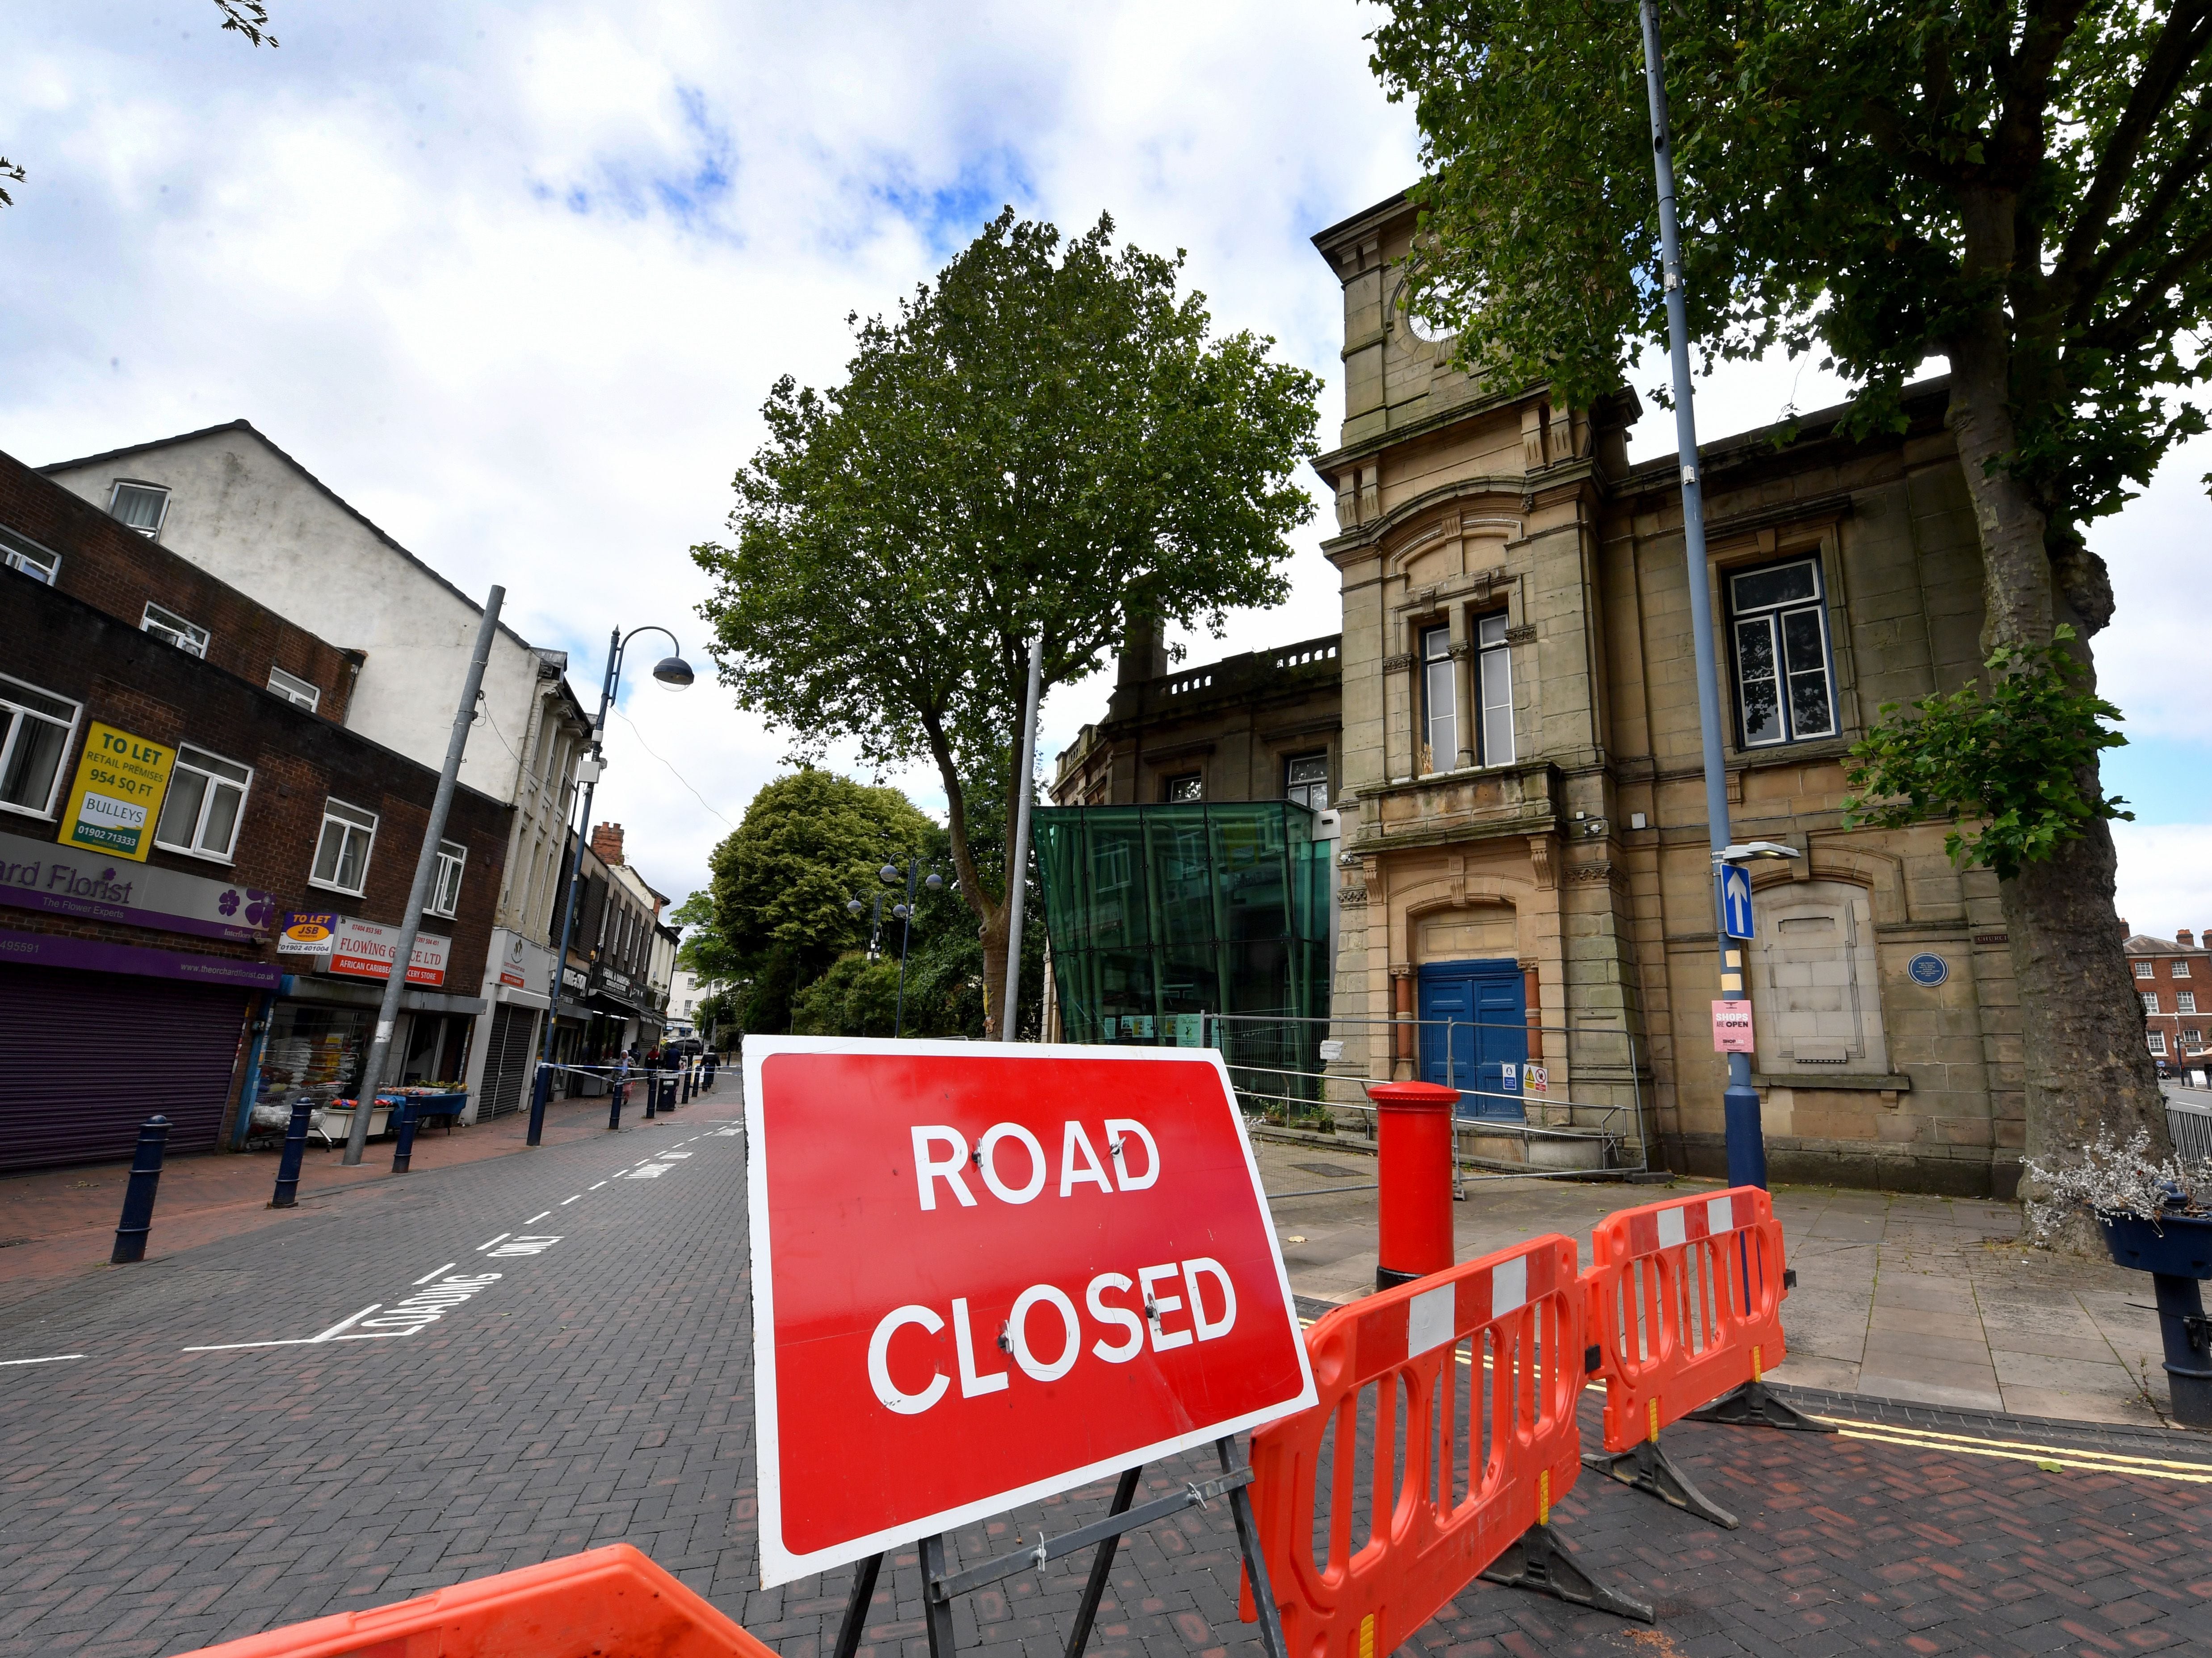 Bilston 'back open for business' after town hall lead thieves cause havoc